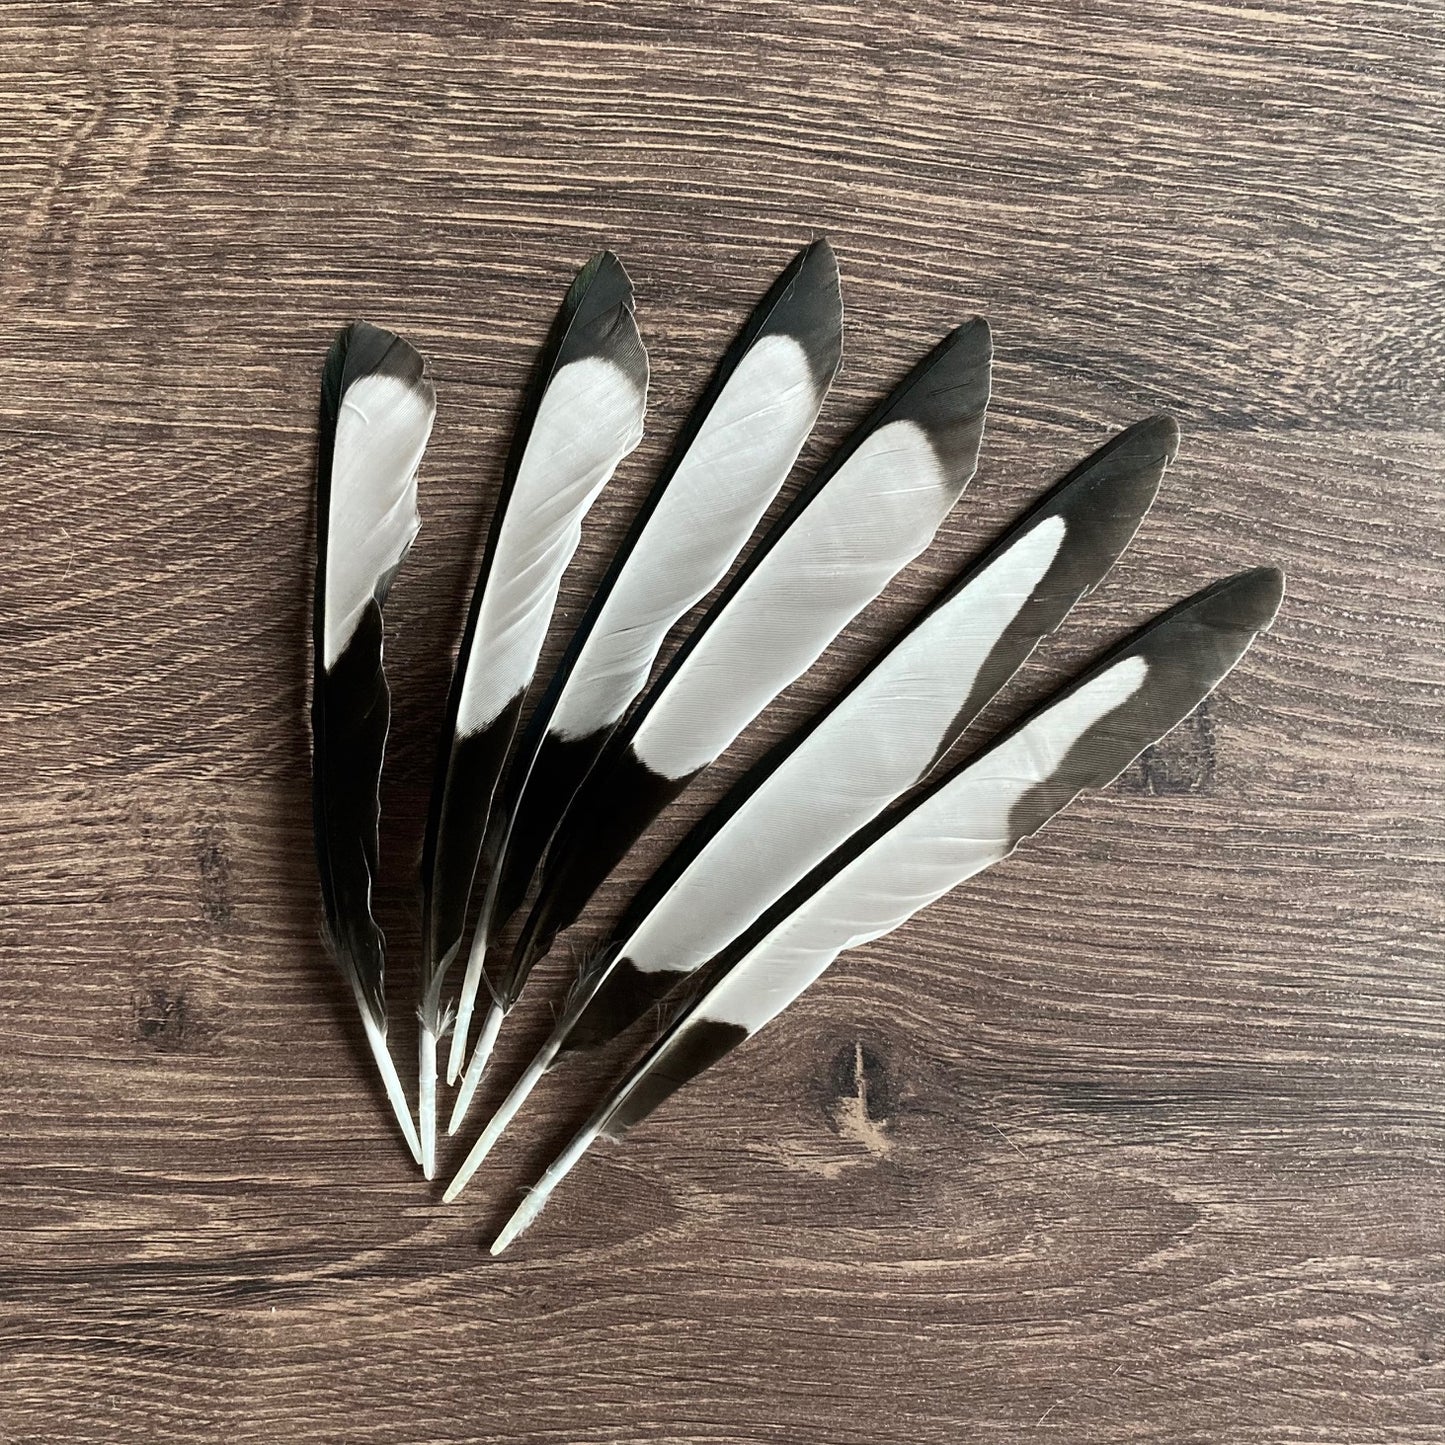 Black & White Magpie Feathers